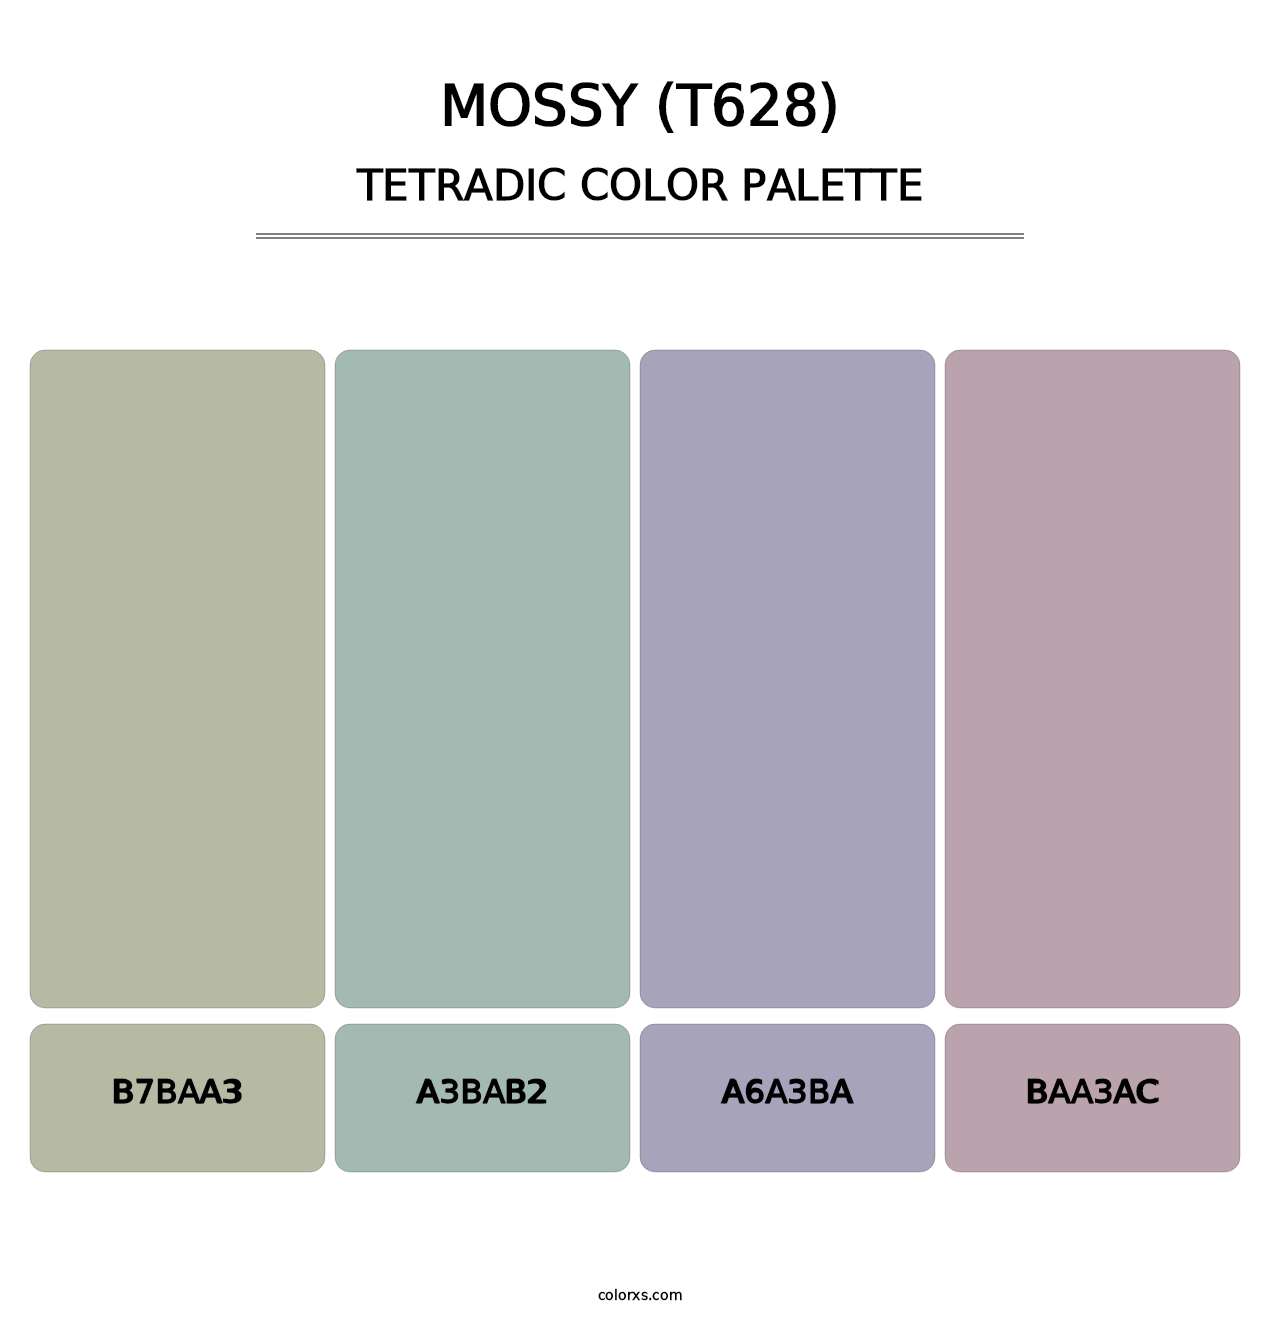 Mossy (T628) - Tetradic Color Palette